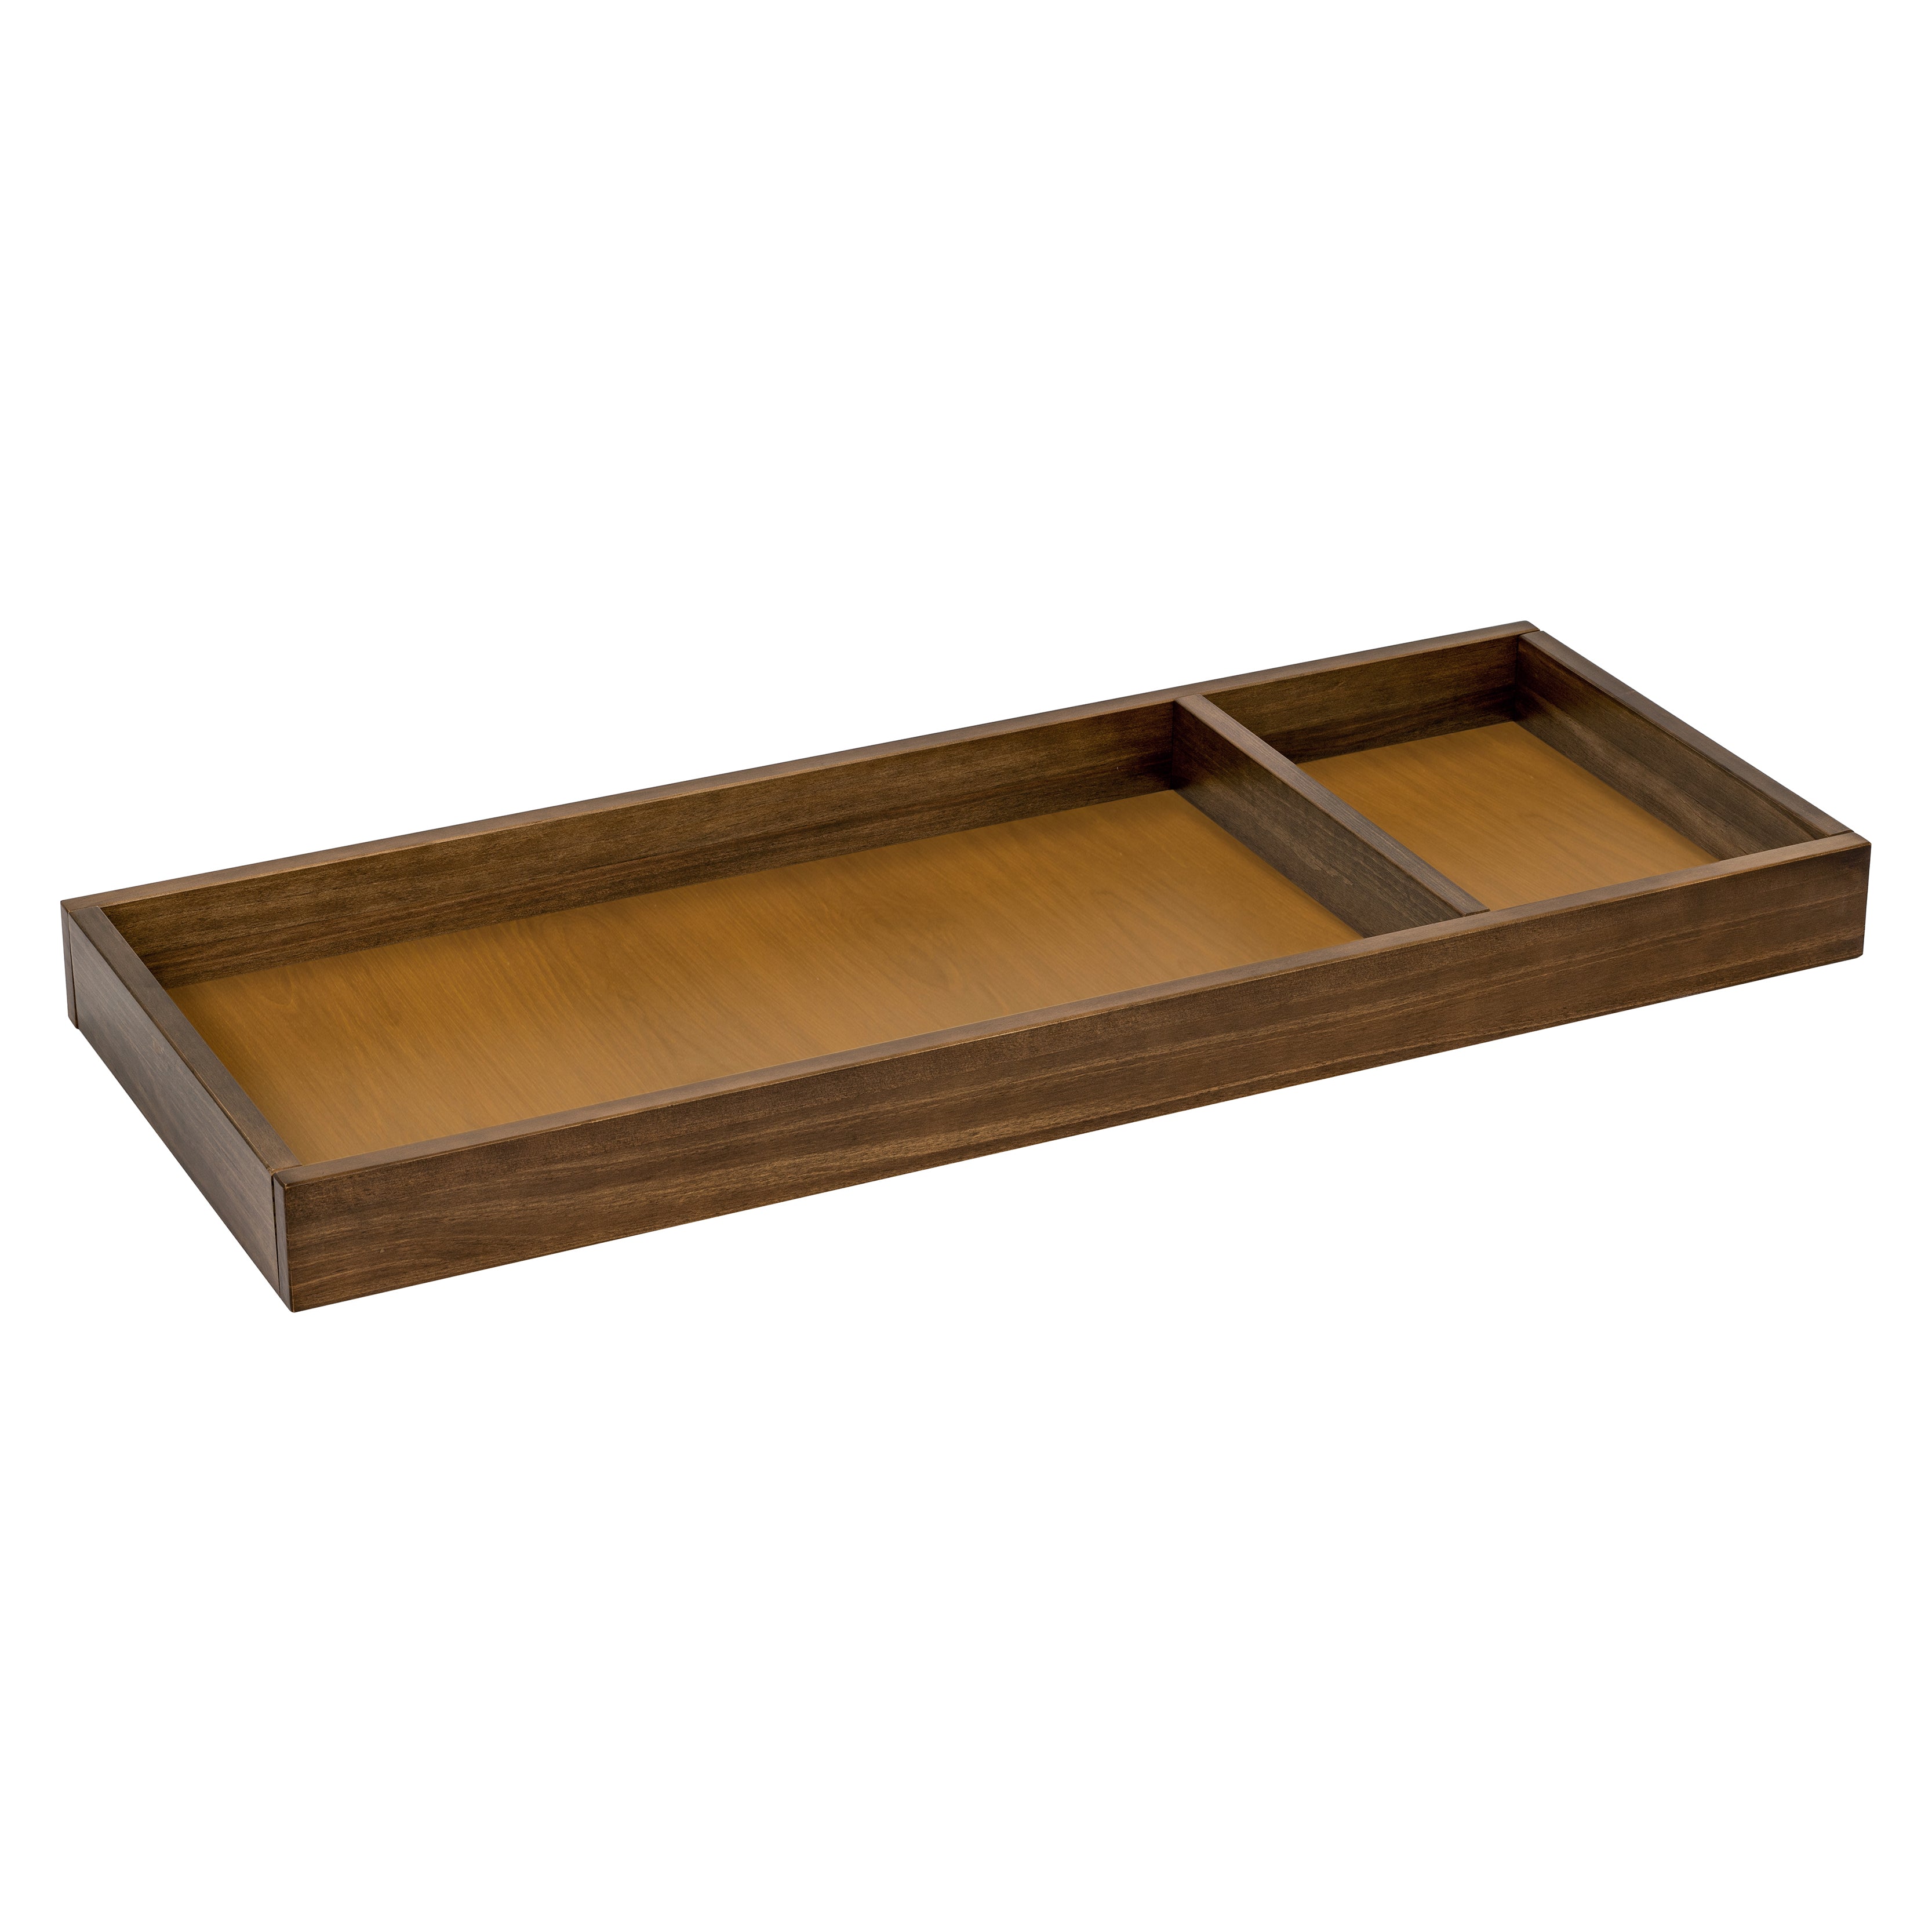 Universal Removable Changing Tray in Natural Walnut - Twinkle Twinkle Little One